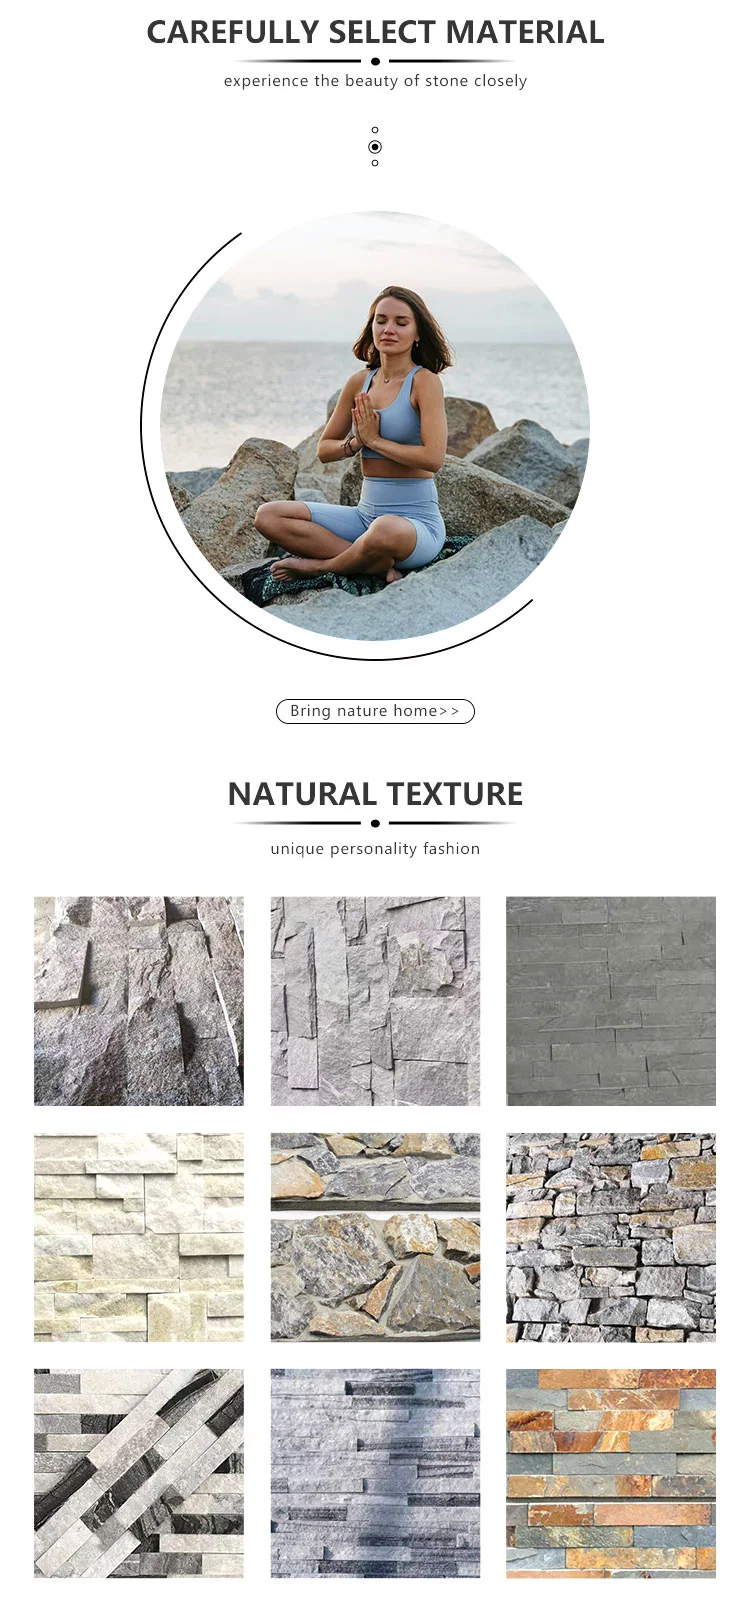 Blve Interior Decoration Stone Crafts Natural Stone Tiles Culture Stone Wall Panel for Hotel